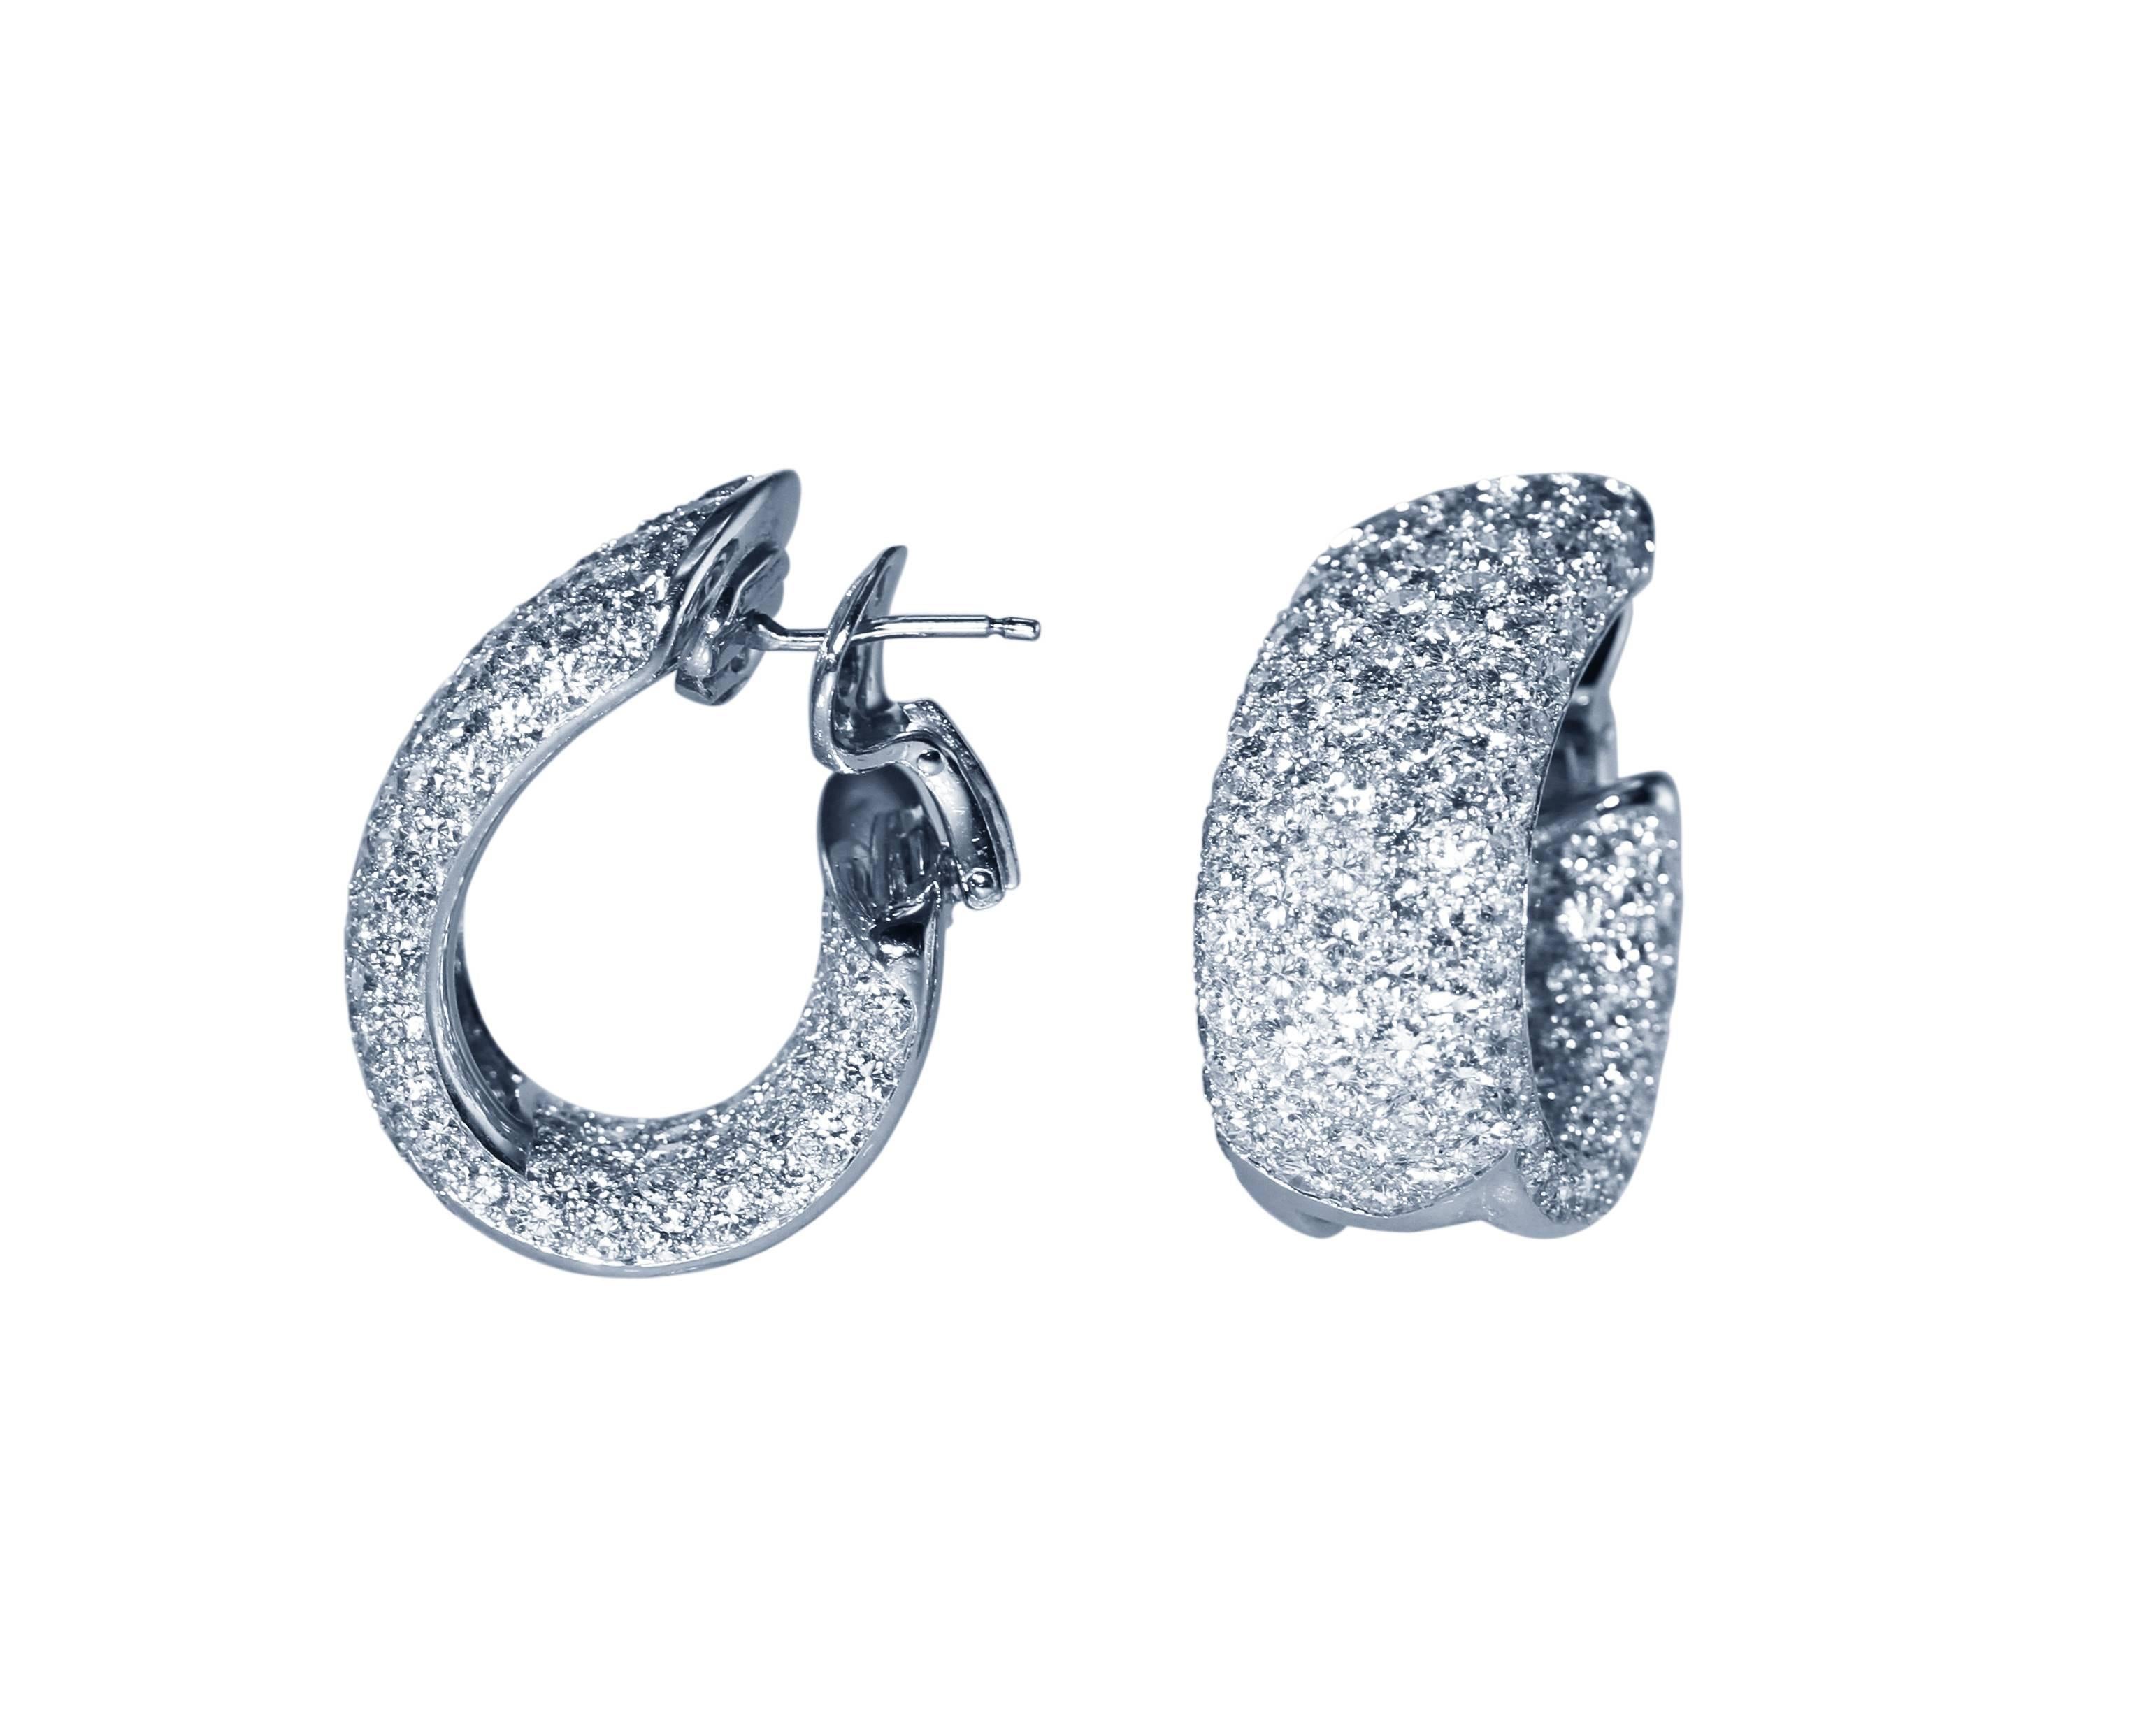 A pair of 18 karat white gold and diamond hoop earrings by Cartier, France, designed as stylized wide hoops pave-set with 288 round diamonds weighing approximately 20.00 carats, gross weight 29.6 grams, measuring 1 1/8 by 1/2 inch, signed Cartier,